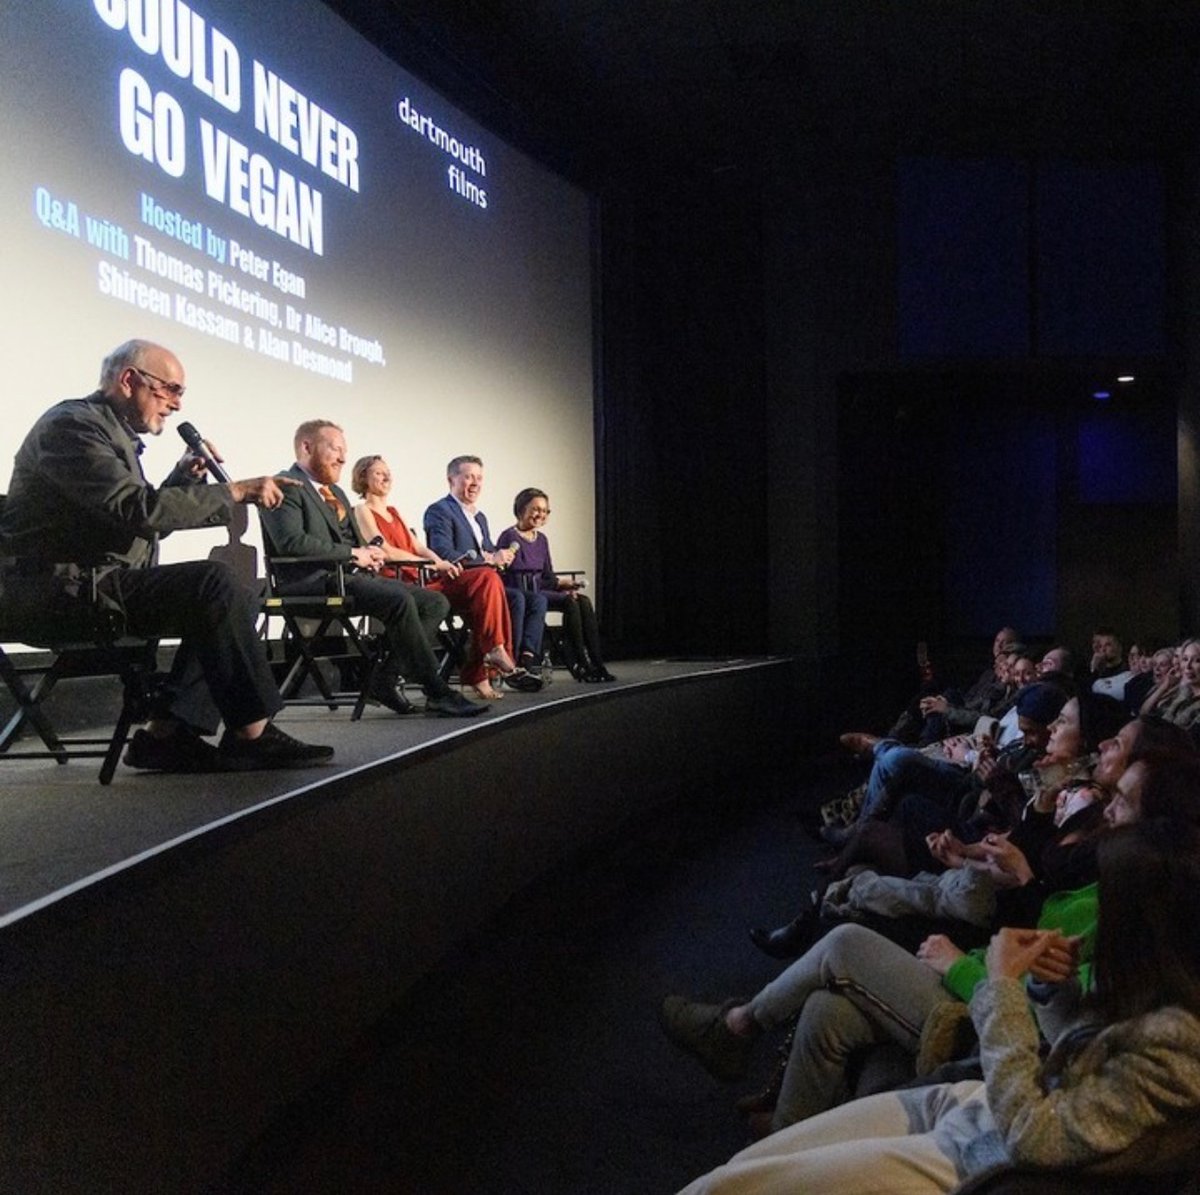 “I Could Never Go Vegan” premier Q&A last night. Thank you to everyone who attended! icouldnevergovegan.co.uk